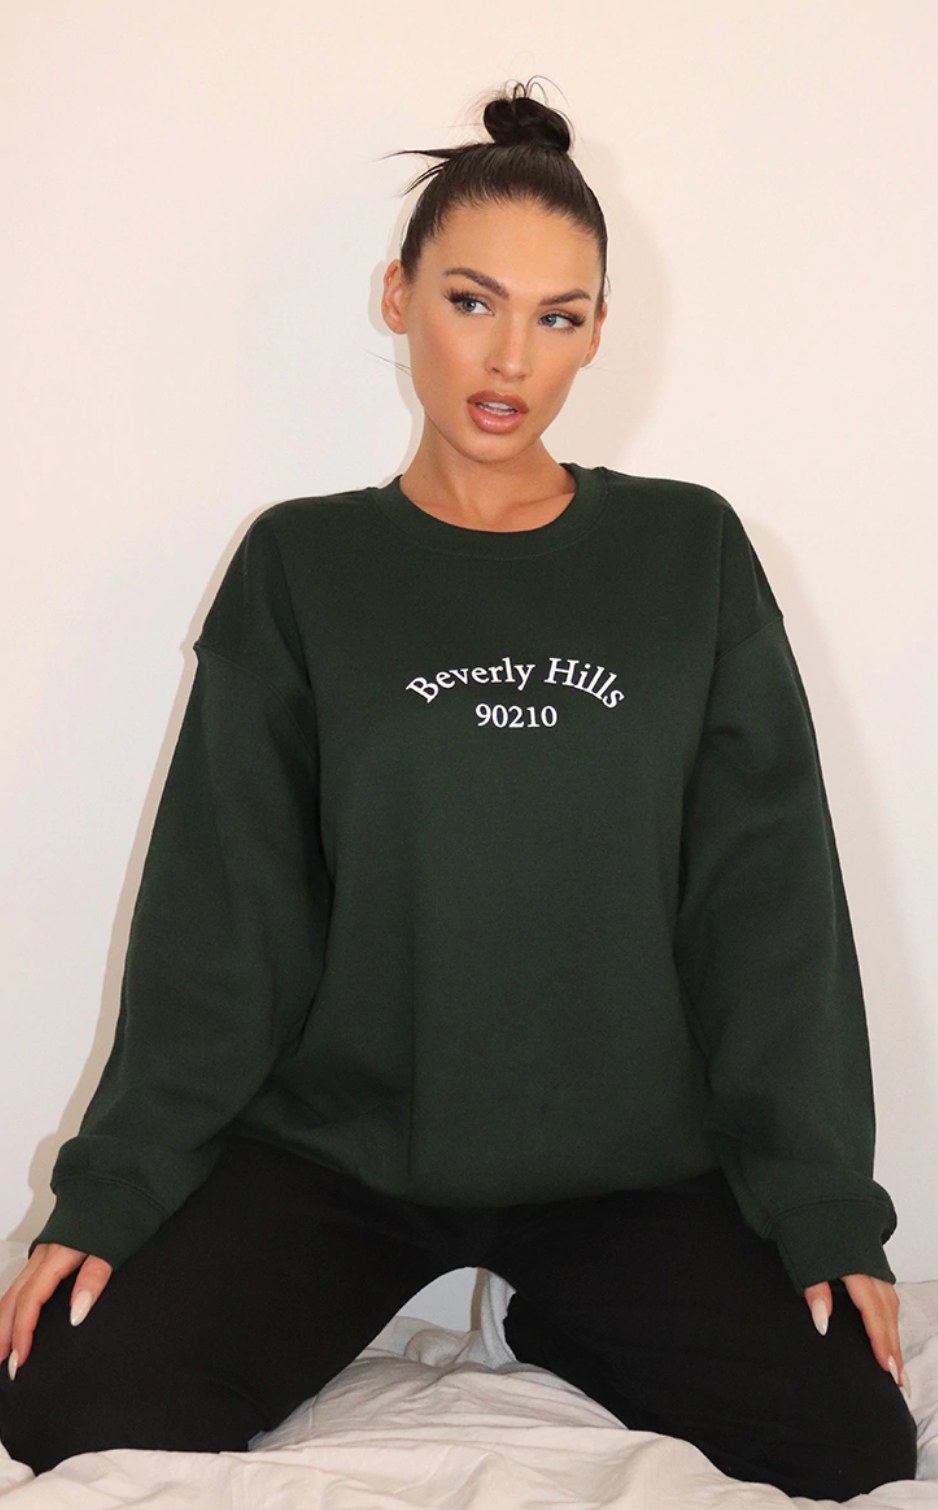 model wearing the forest green sweatshirt with beverly hills 90210 printed on it